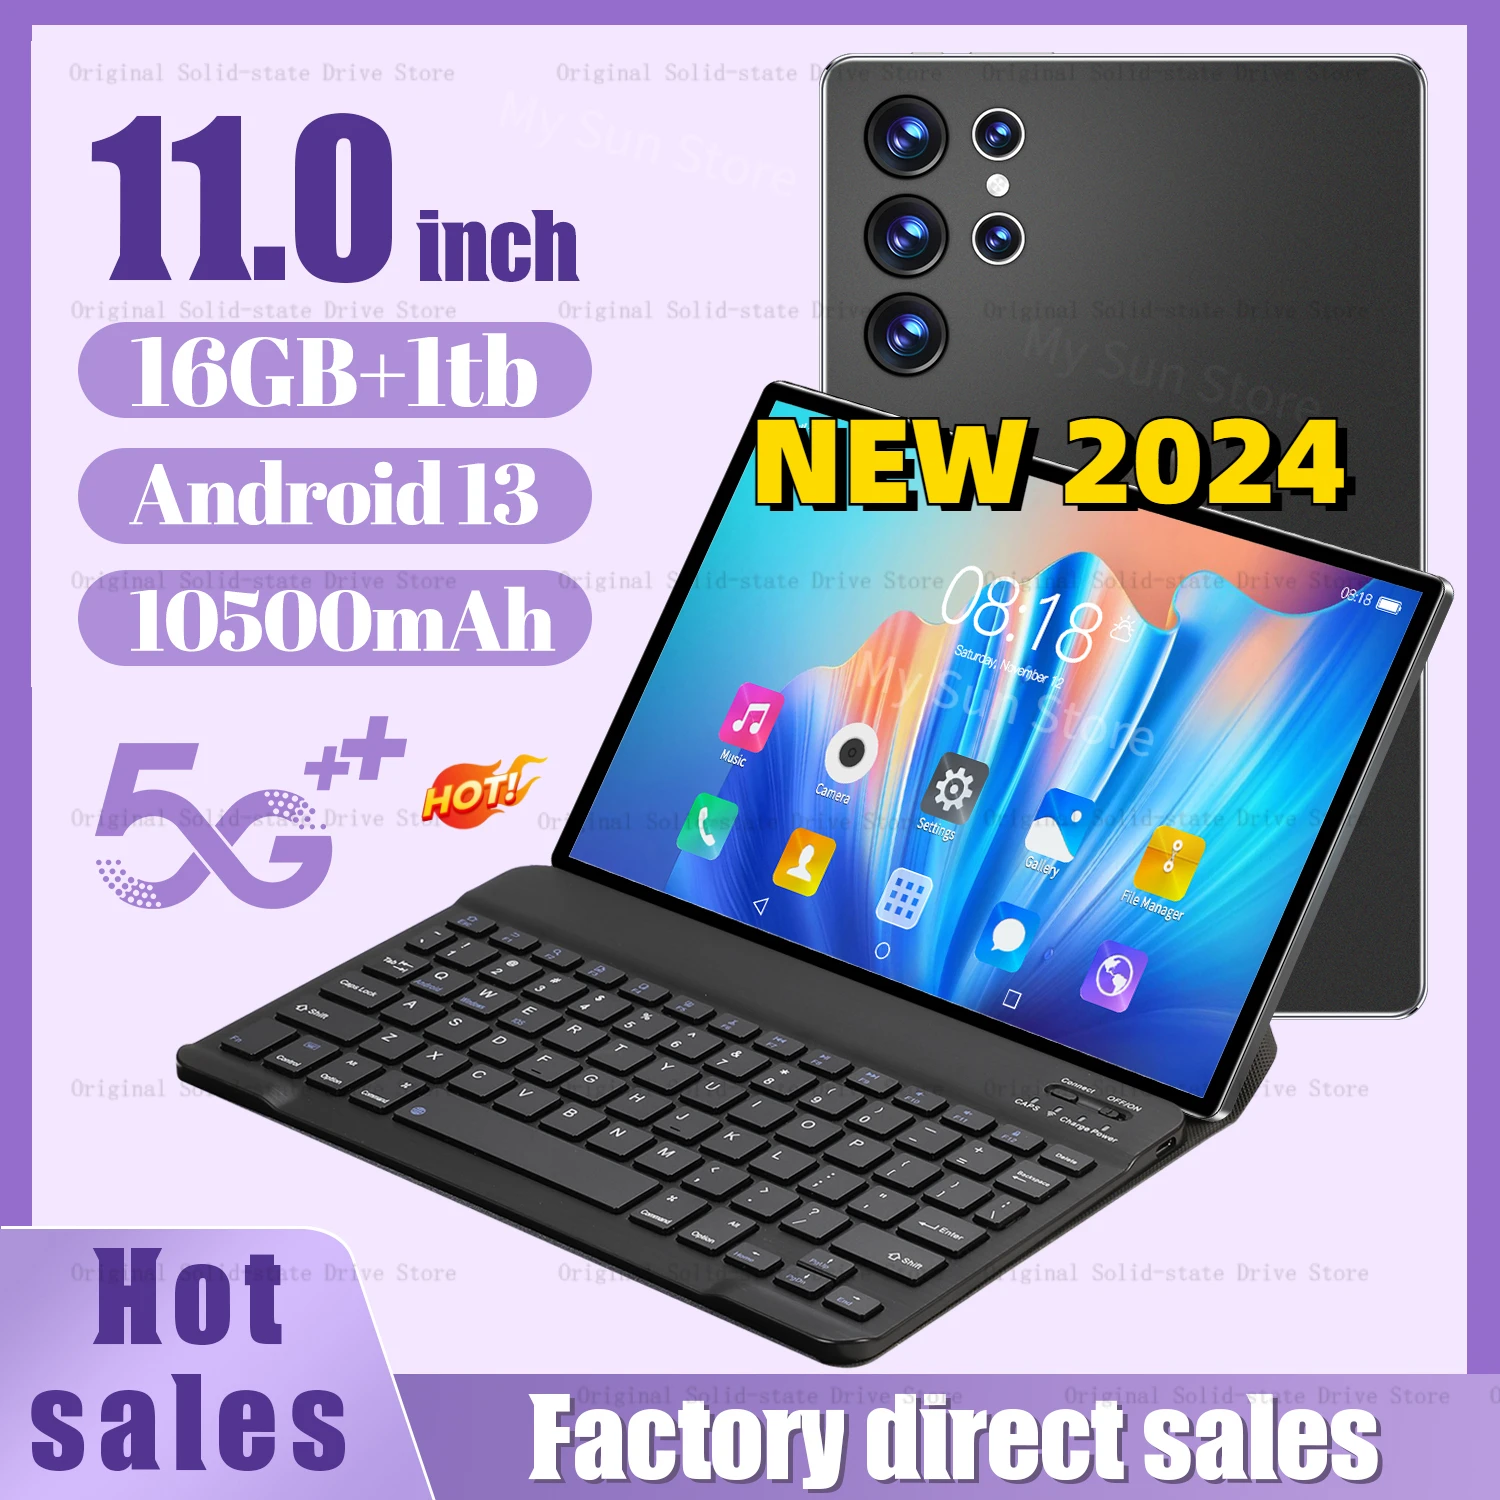 

Tablet PC 10.1inch Android 13.0 16GB RAM, 512GB ROM, Wi-Fi, Google Play, GPS Dual SIM, Calling With Keyboard, Global Edition